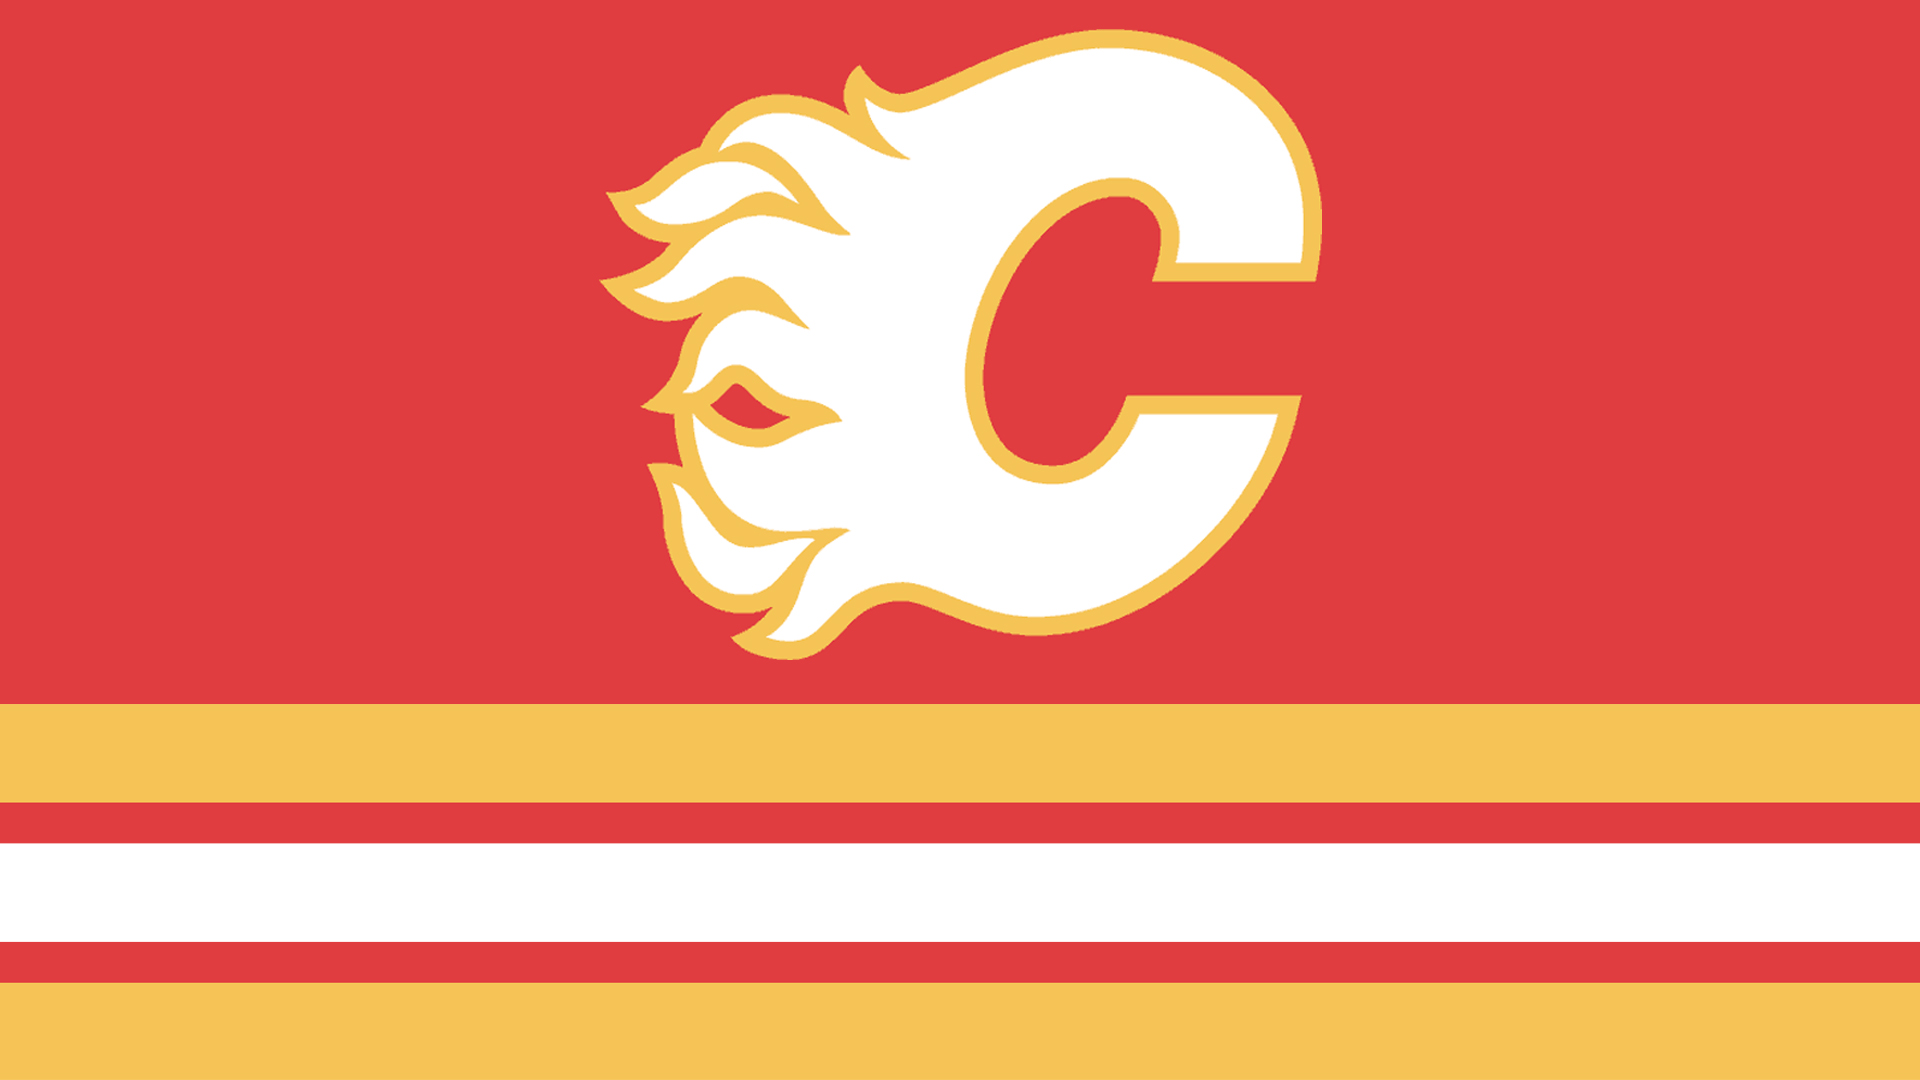 Calgary Flames Desktop Backgrounds wallpapers   General Discussions 1920x1080